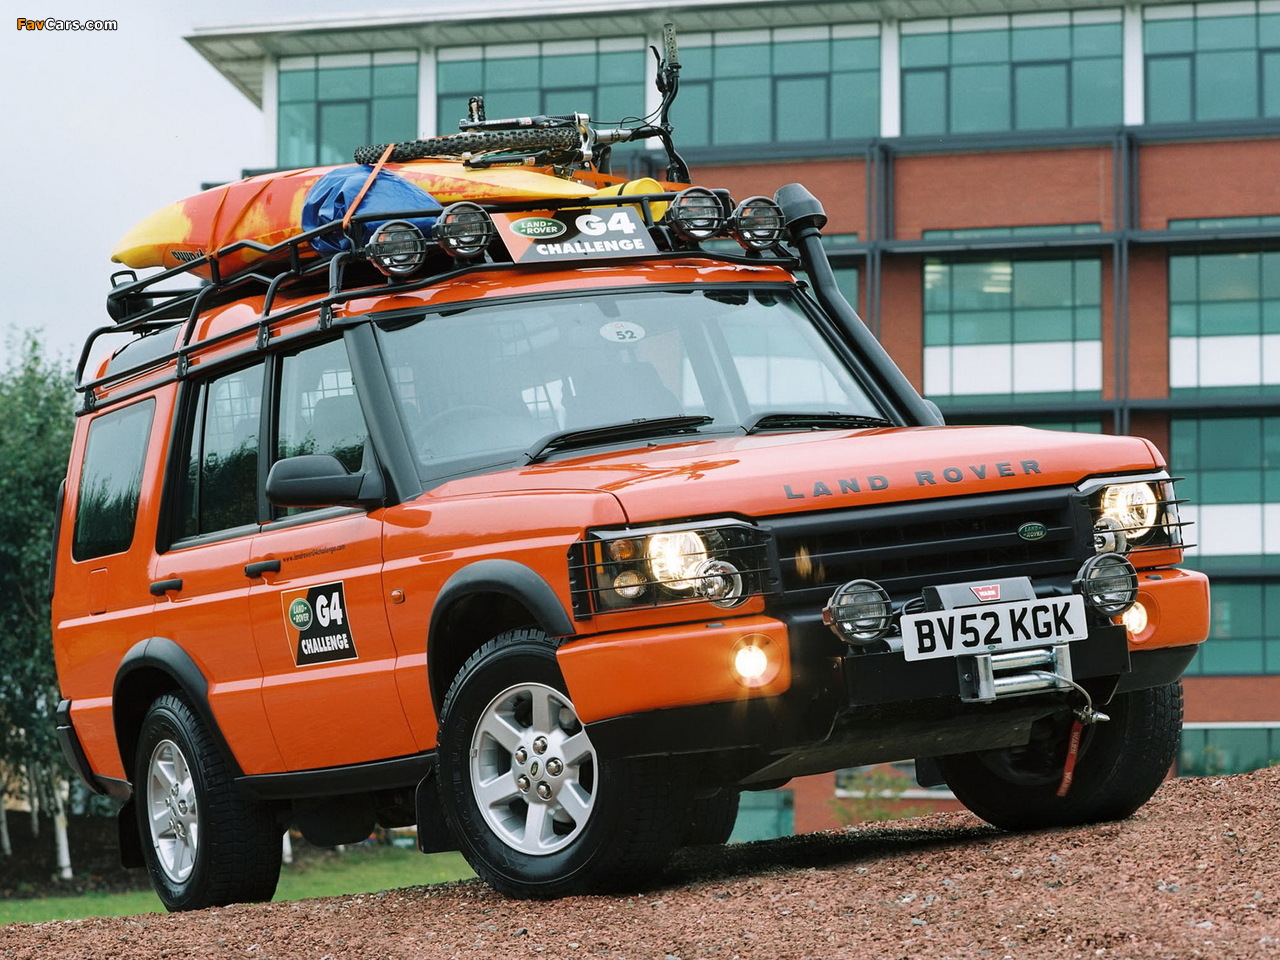 Land Rover Discovery G4 Edition 2003 pictures (1280 x 960)